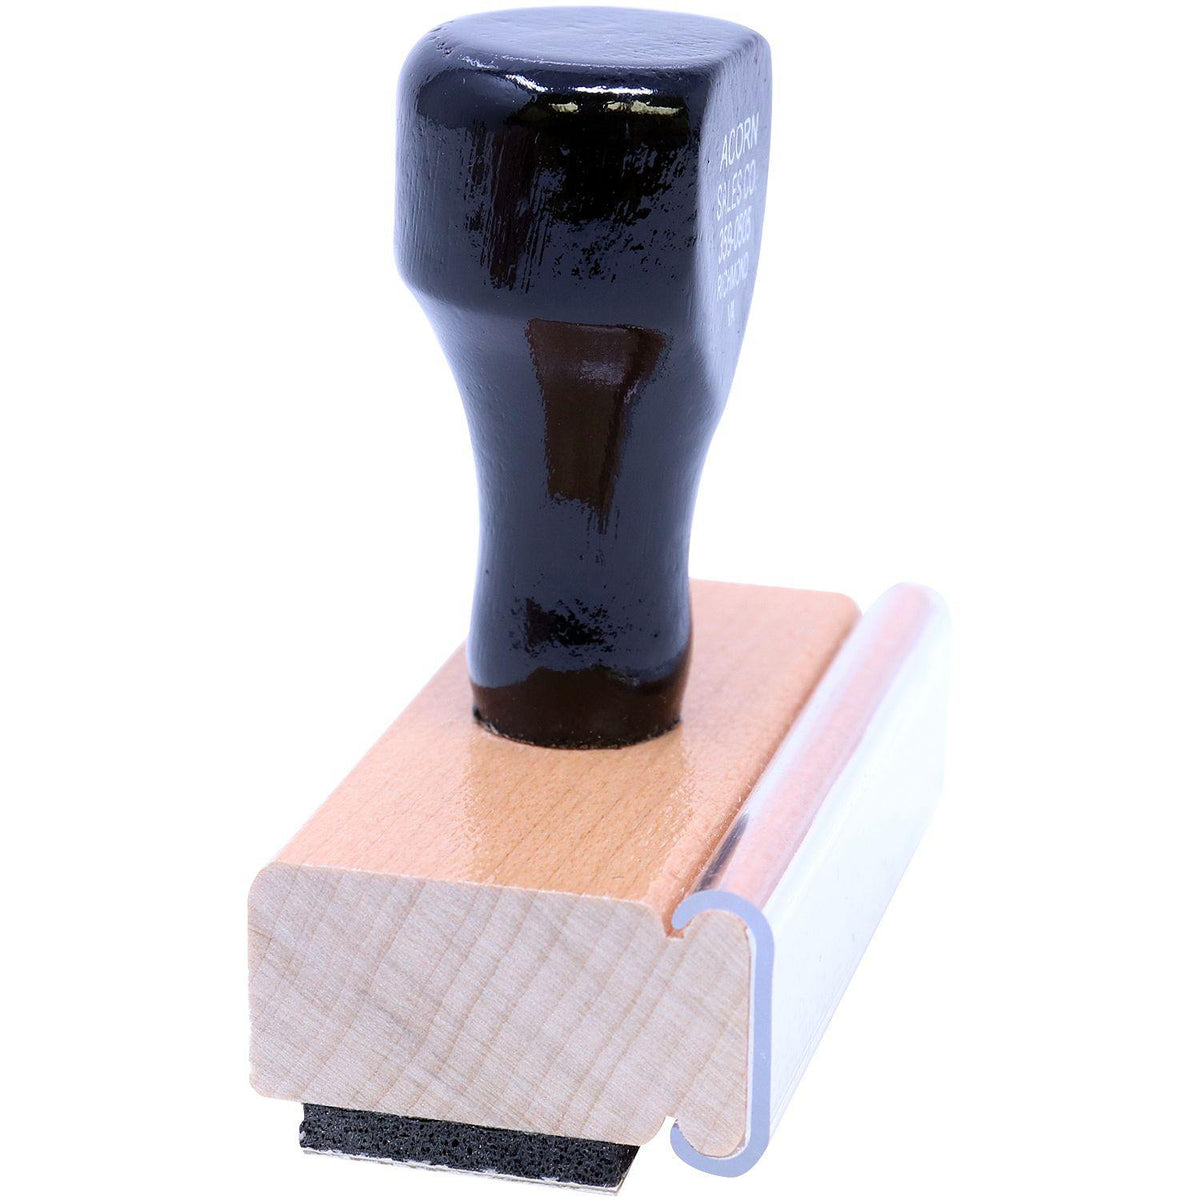 No Negociable Rubber Stamp - Engineer Seal Stamps - Brand_Acorn, Impression Size_Small, Stamp Type_Regular Stamp, Type of Use_Office